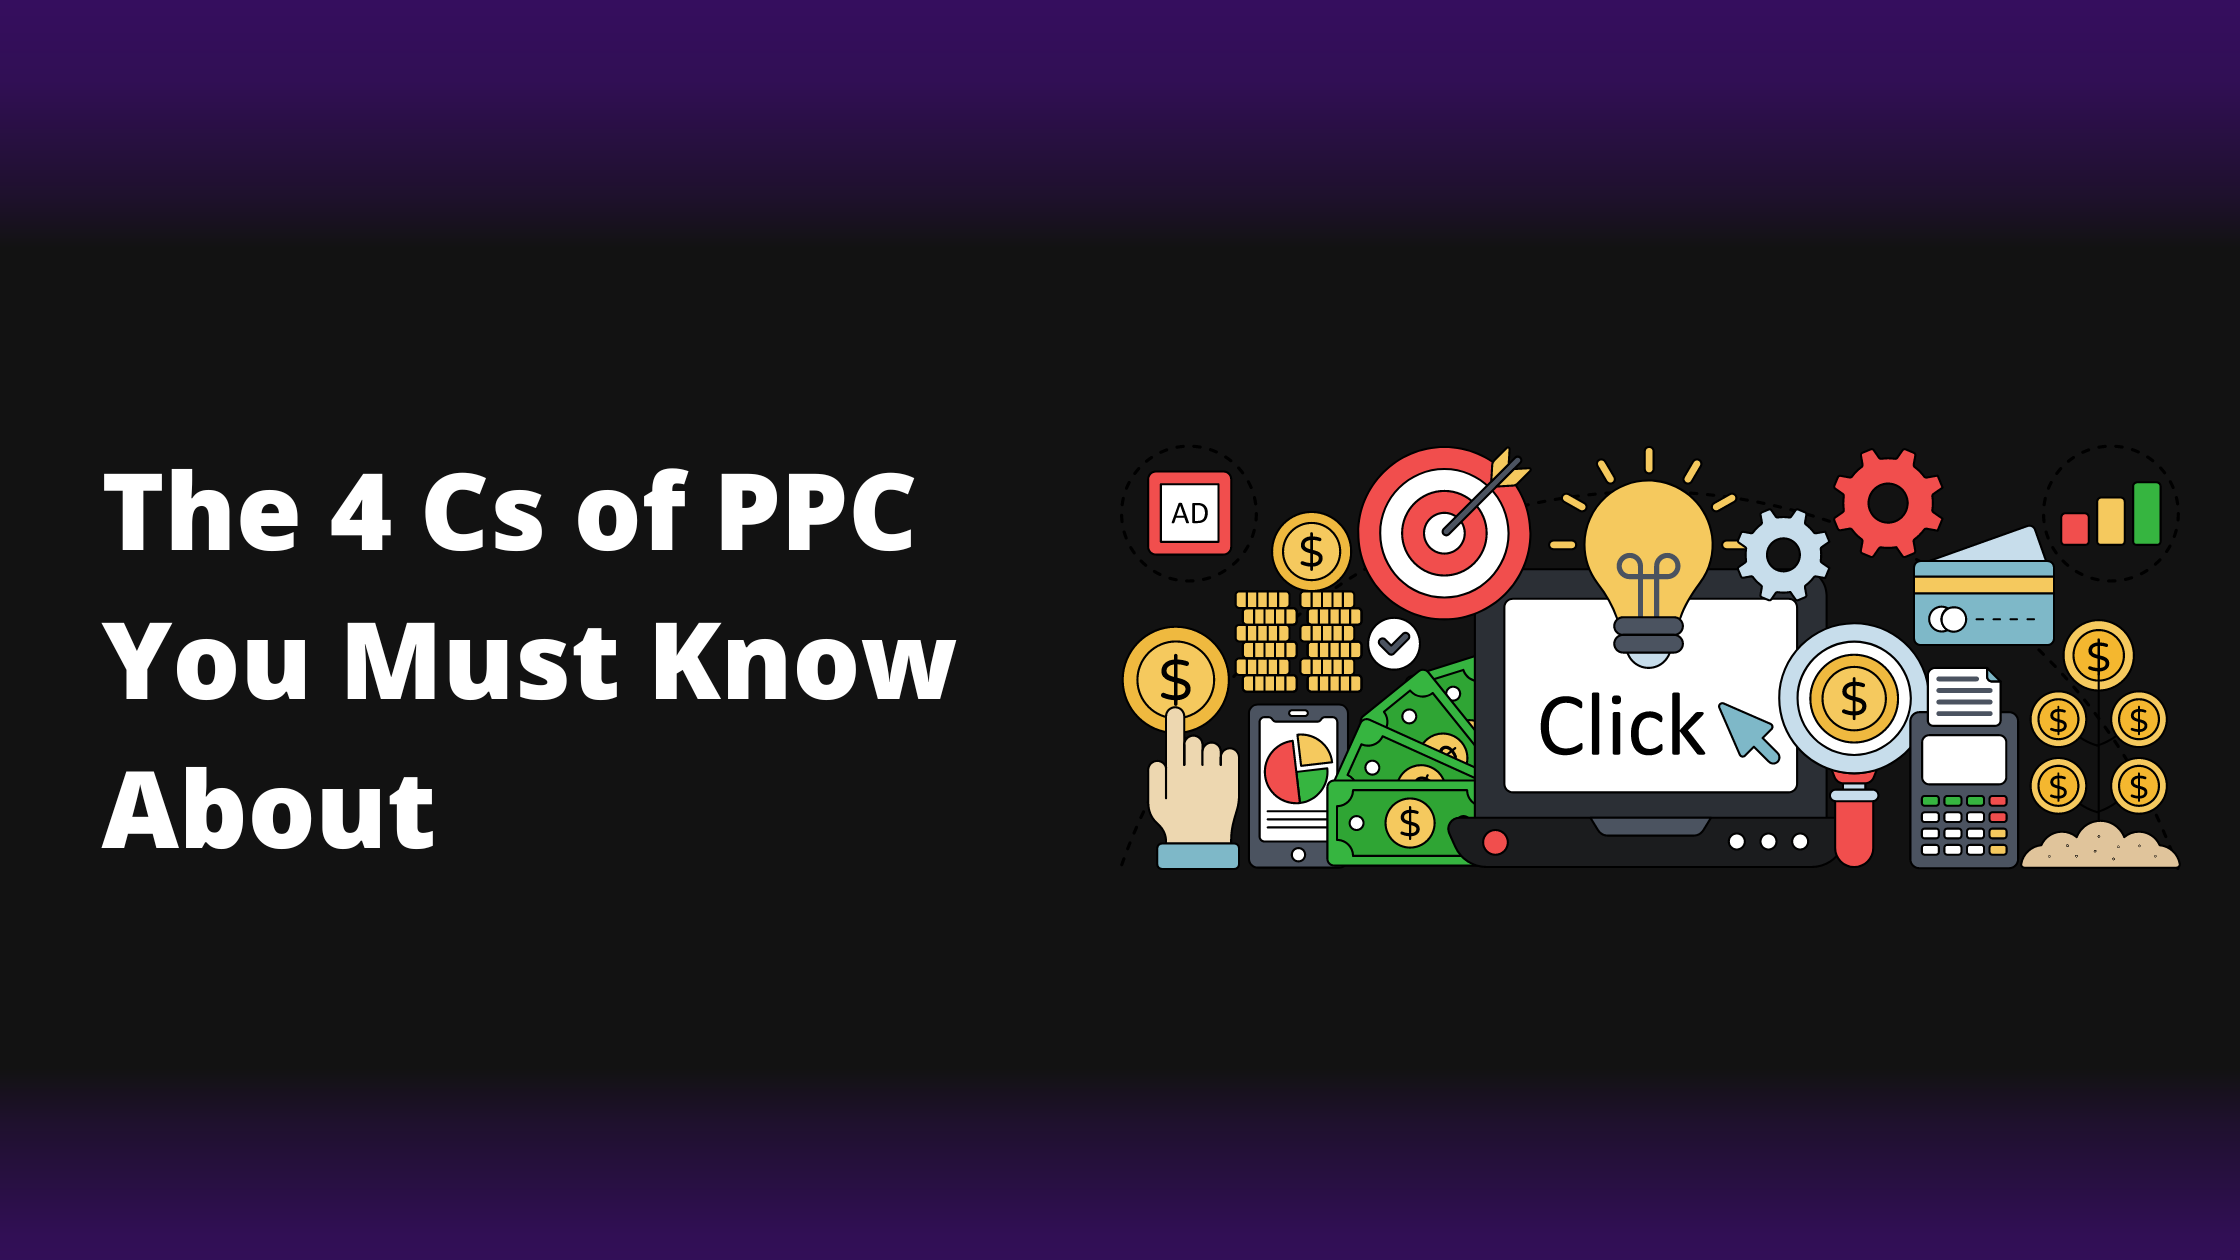 The 4 Cs of PPC You Must Know About